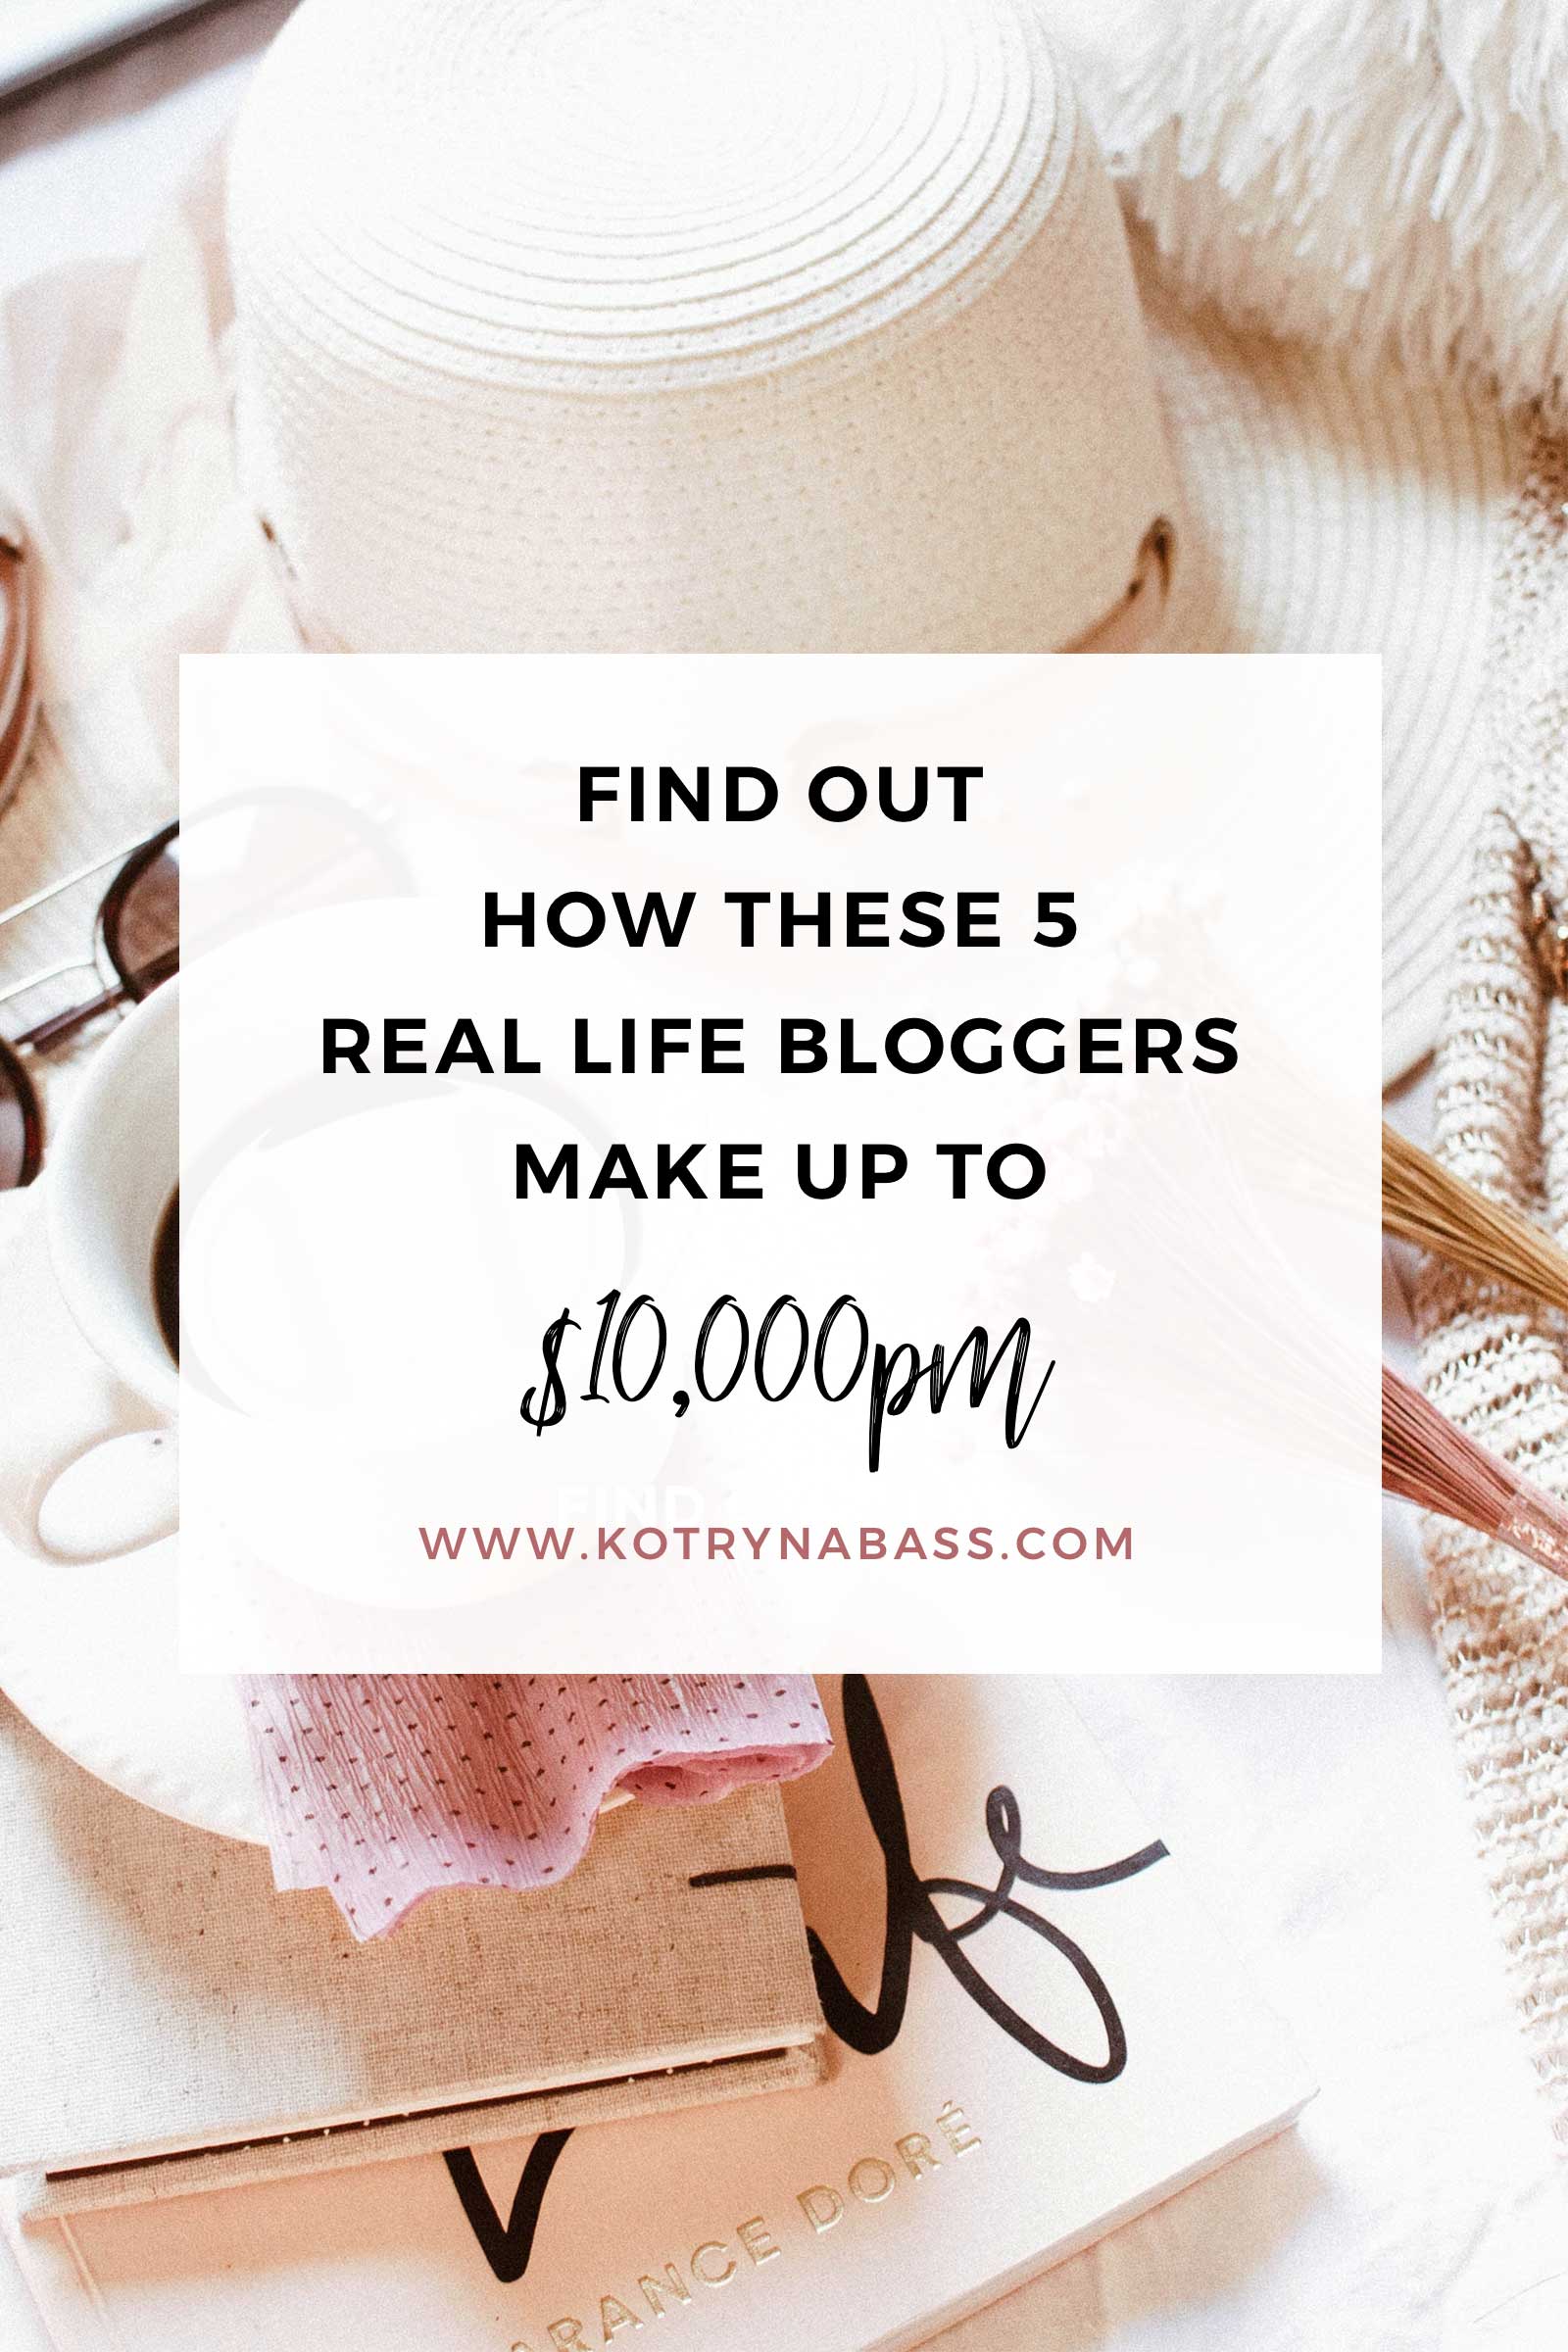 Find out how these 5 real life bloggers make up to $10,000 per month! Keen to start making money online? Learn from these inspiring blog owners!